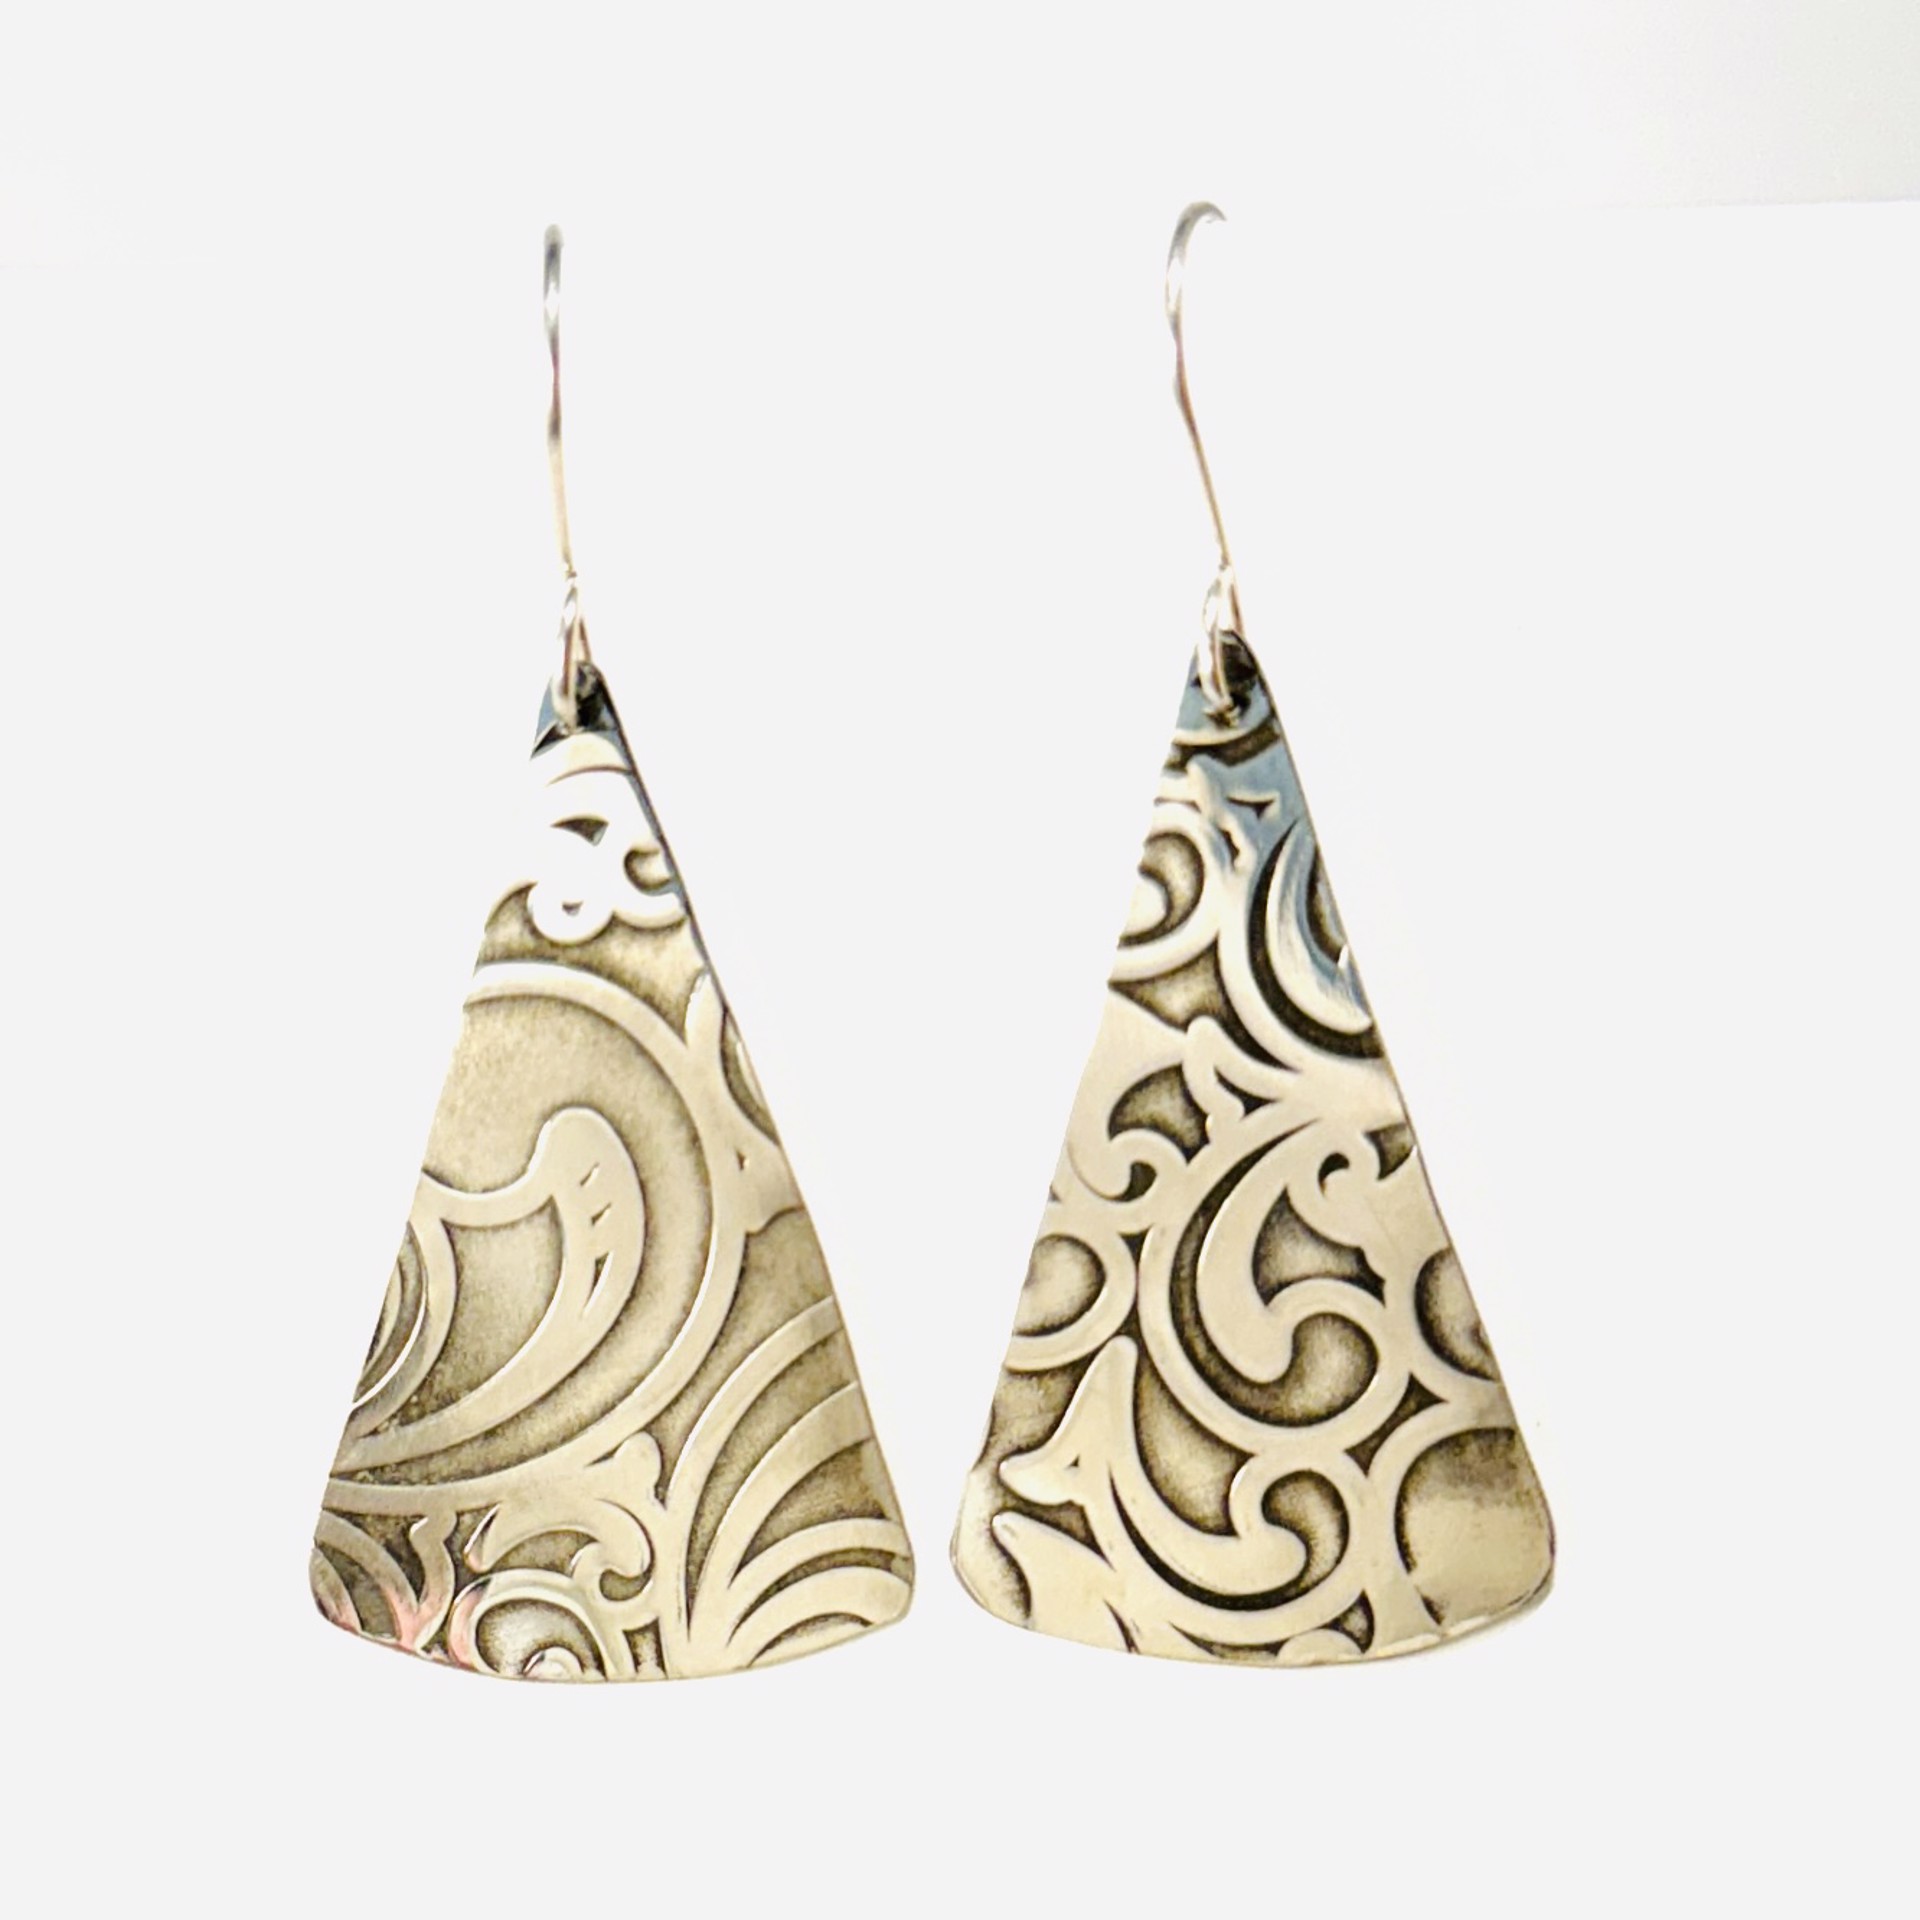 Sterling Triangles with Swirl Design Earrings AB23-92 by Anne Bivens